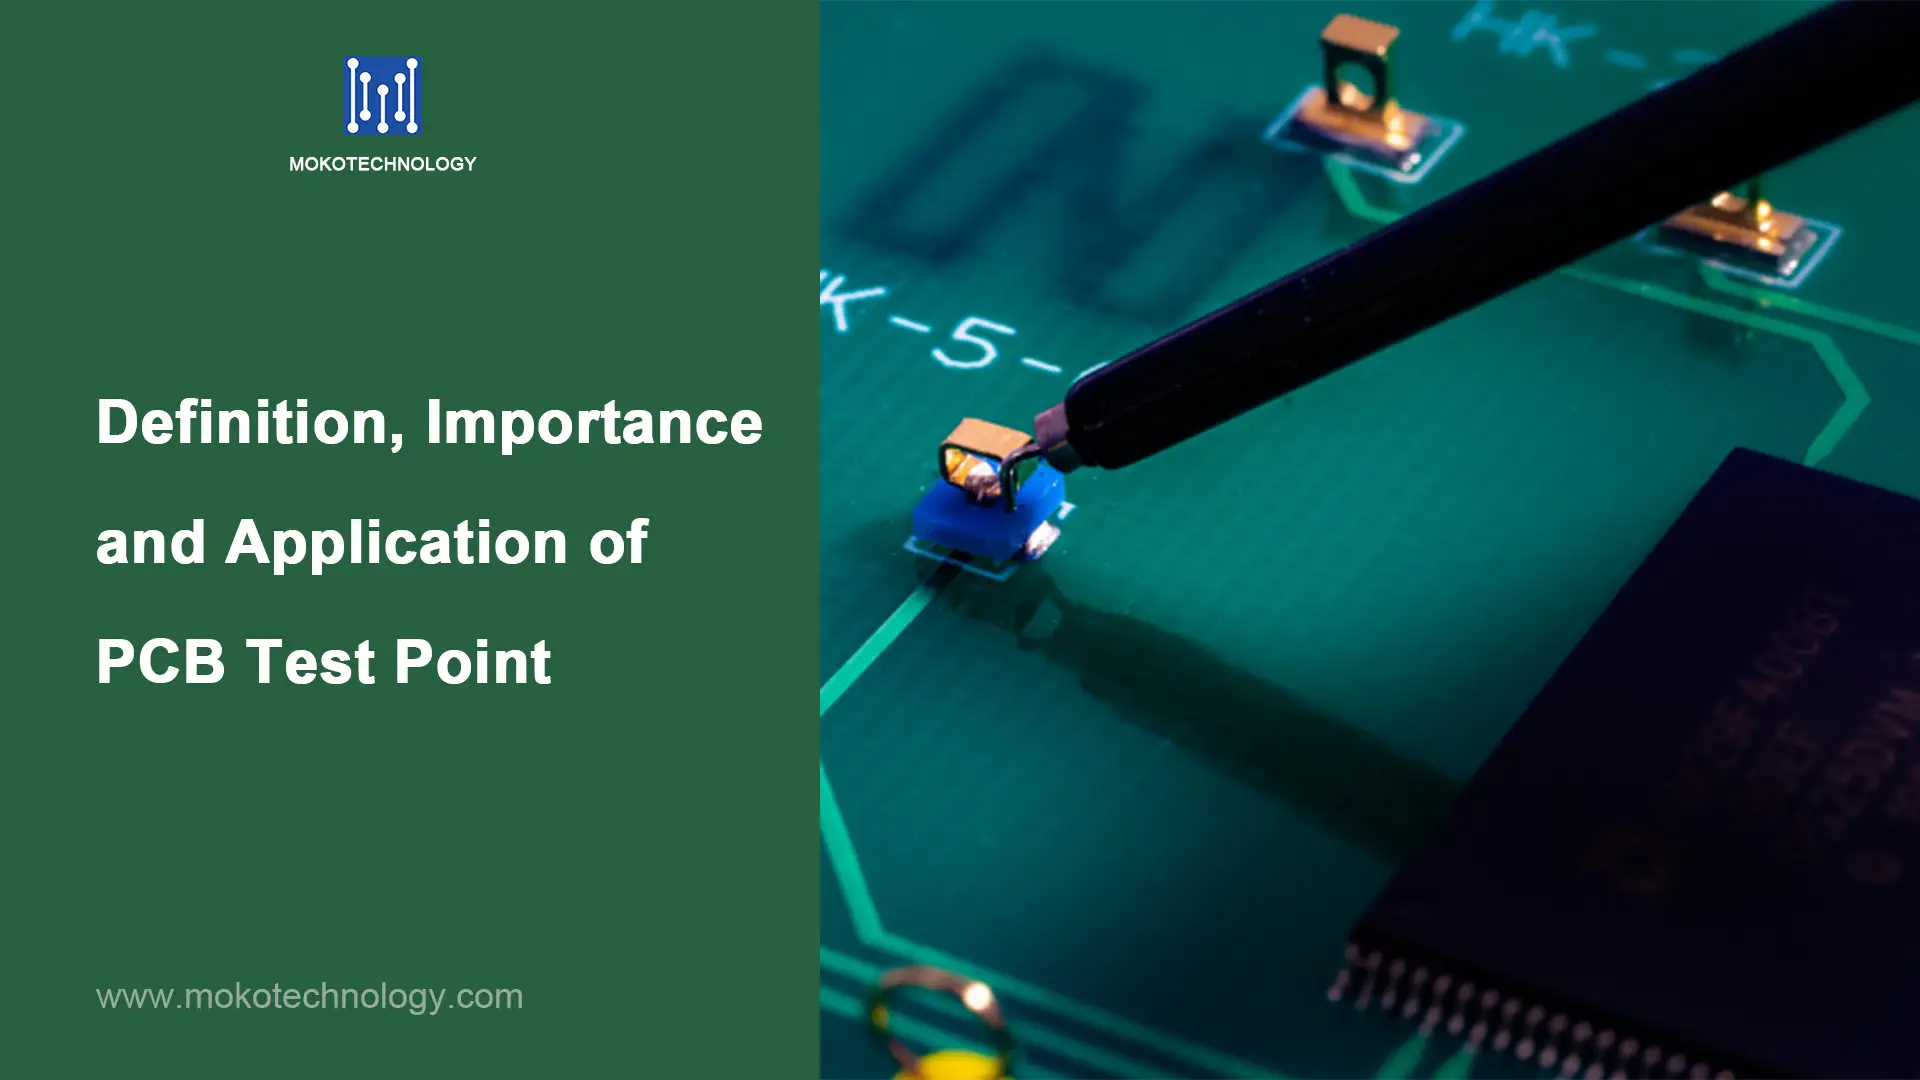 Definition, Importance and Application of PCB Test Point